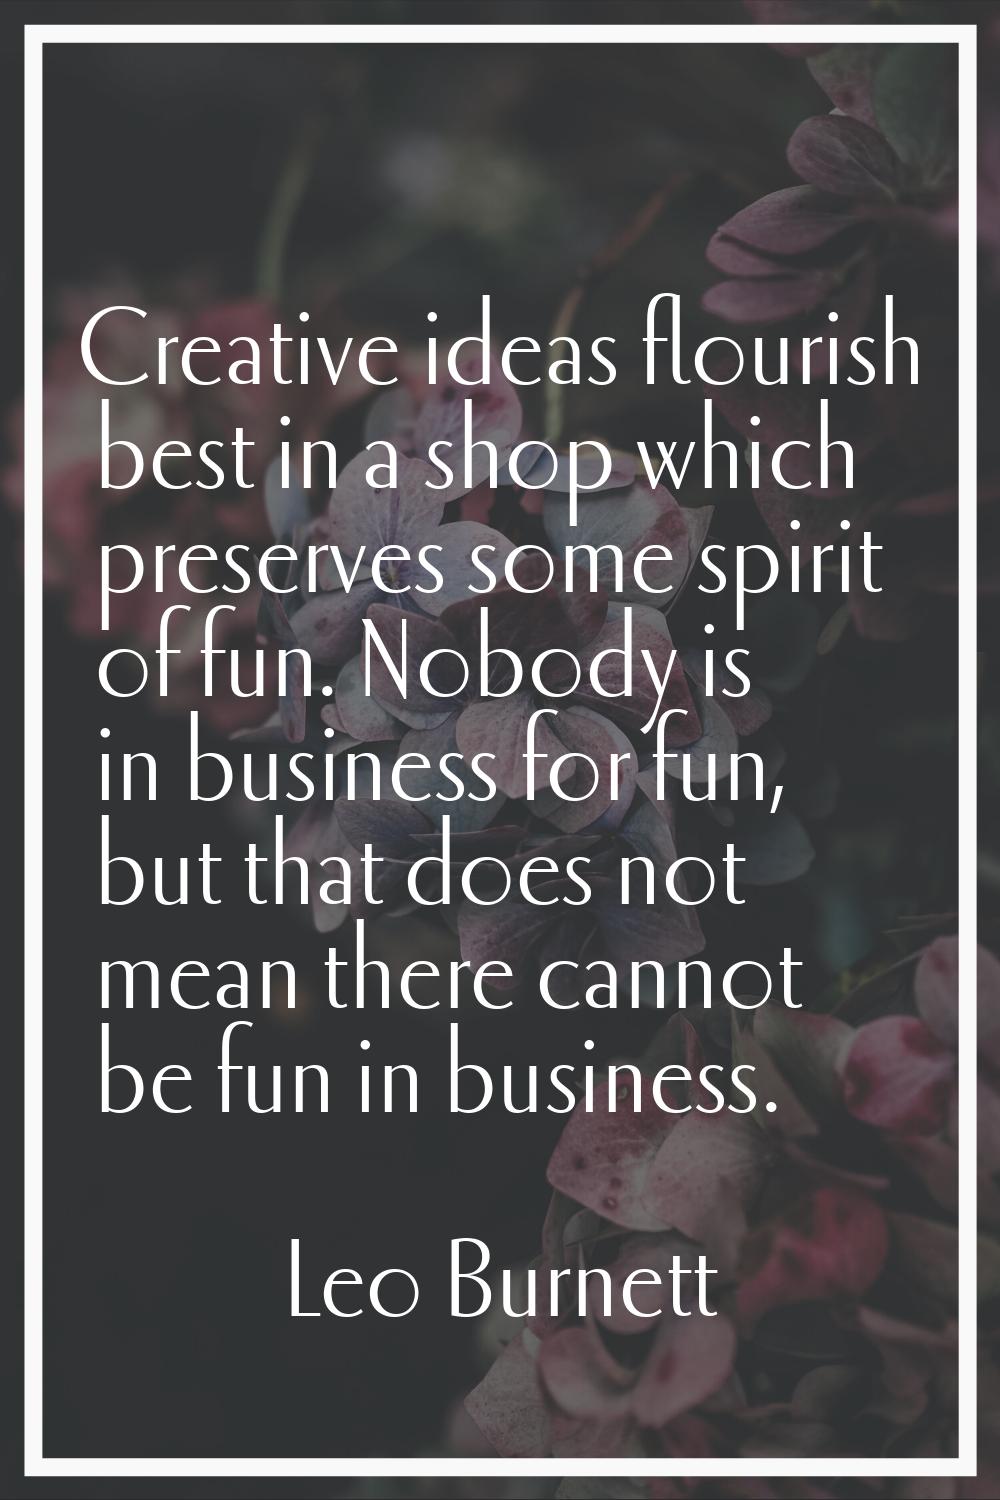 Creative ideas flourish best in a shop which preserves some spirit of fun. Nobody is in business fo